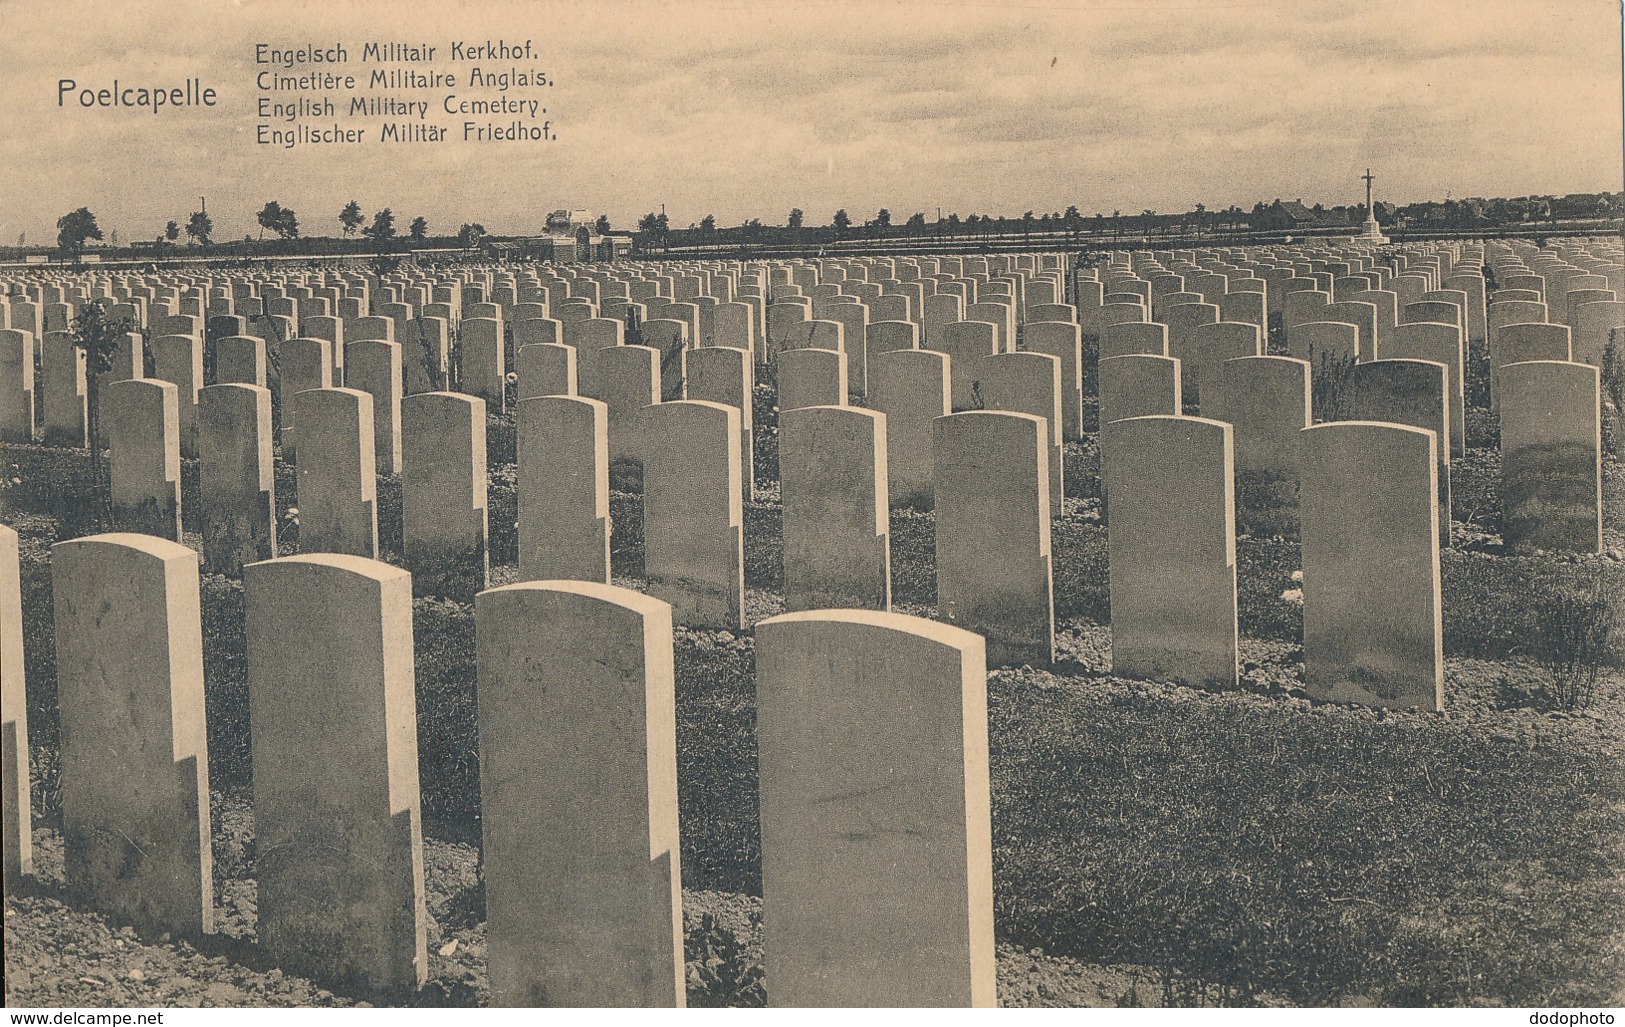 R019485 Poelcapelle. English Military Cemetery. A. Francois - Monde